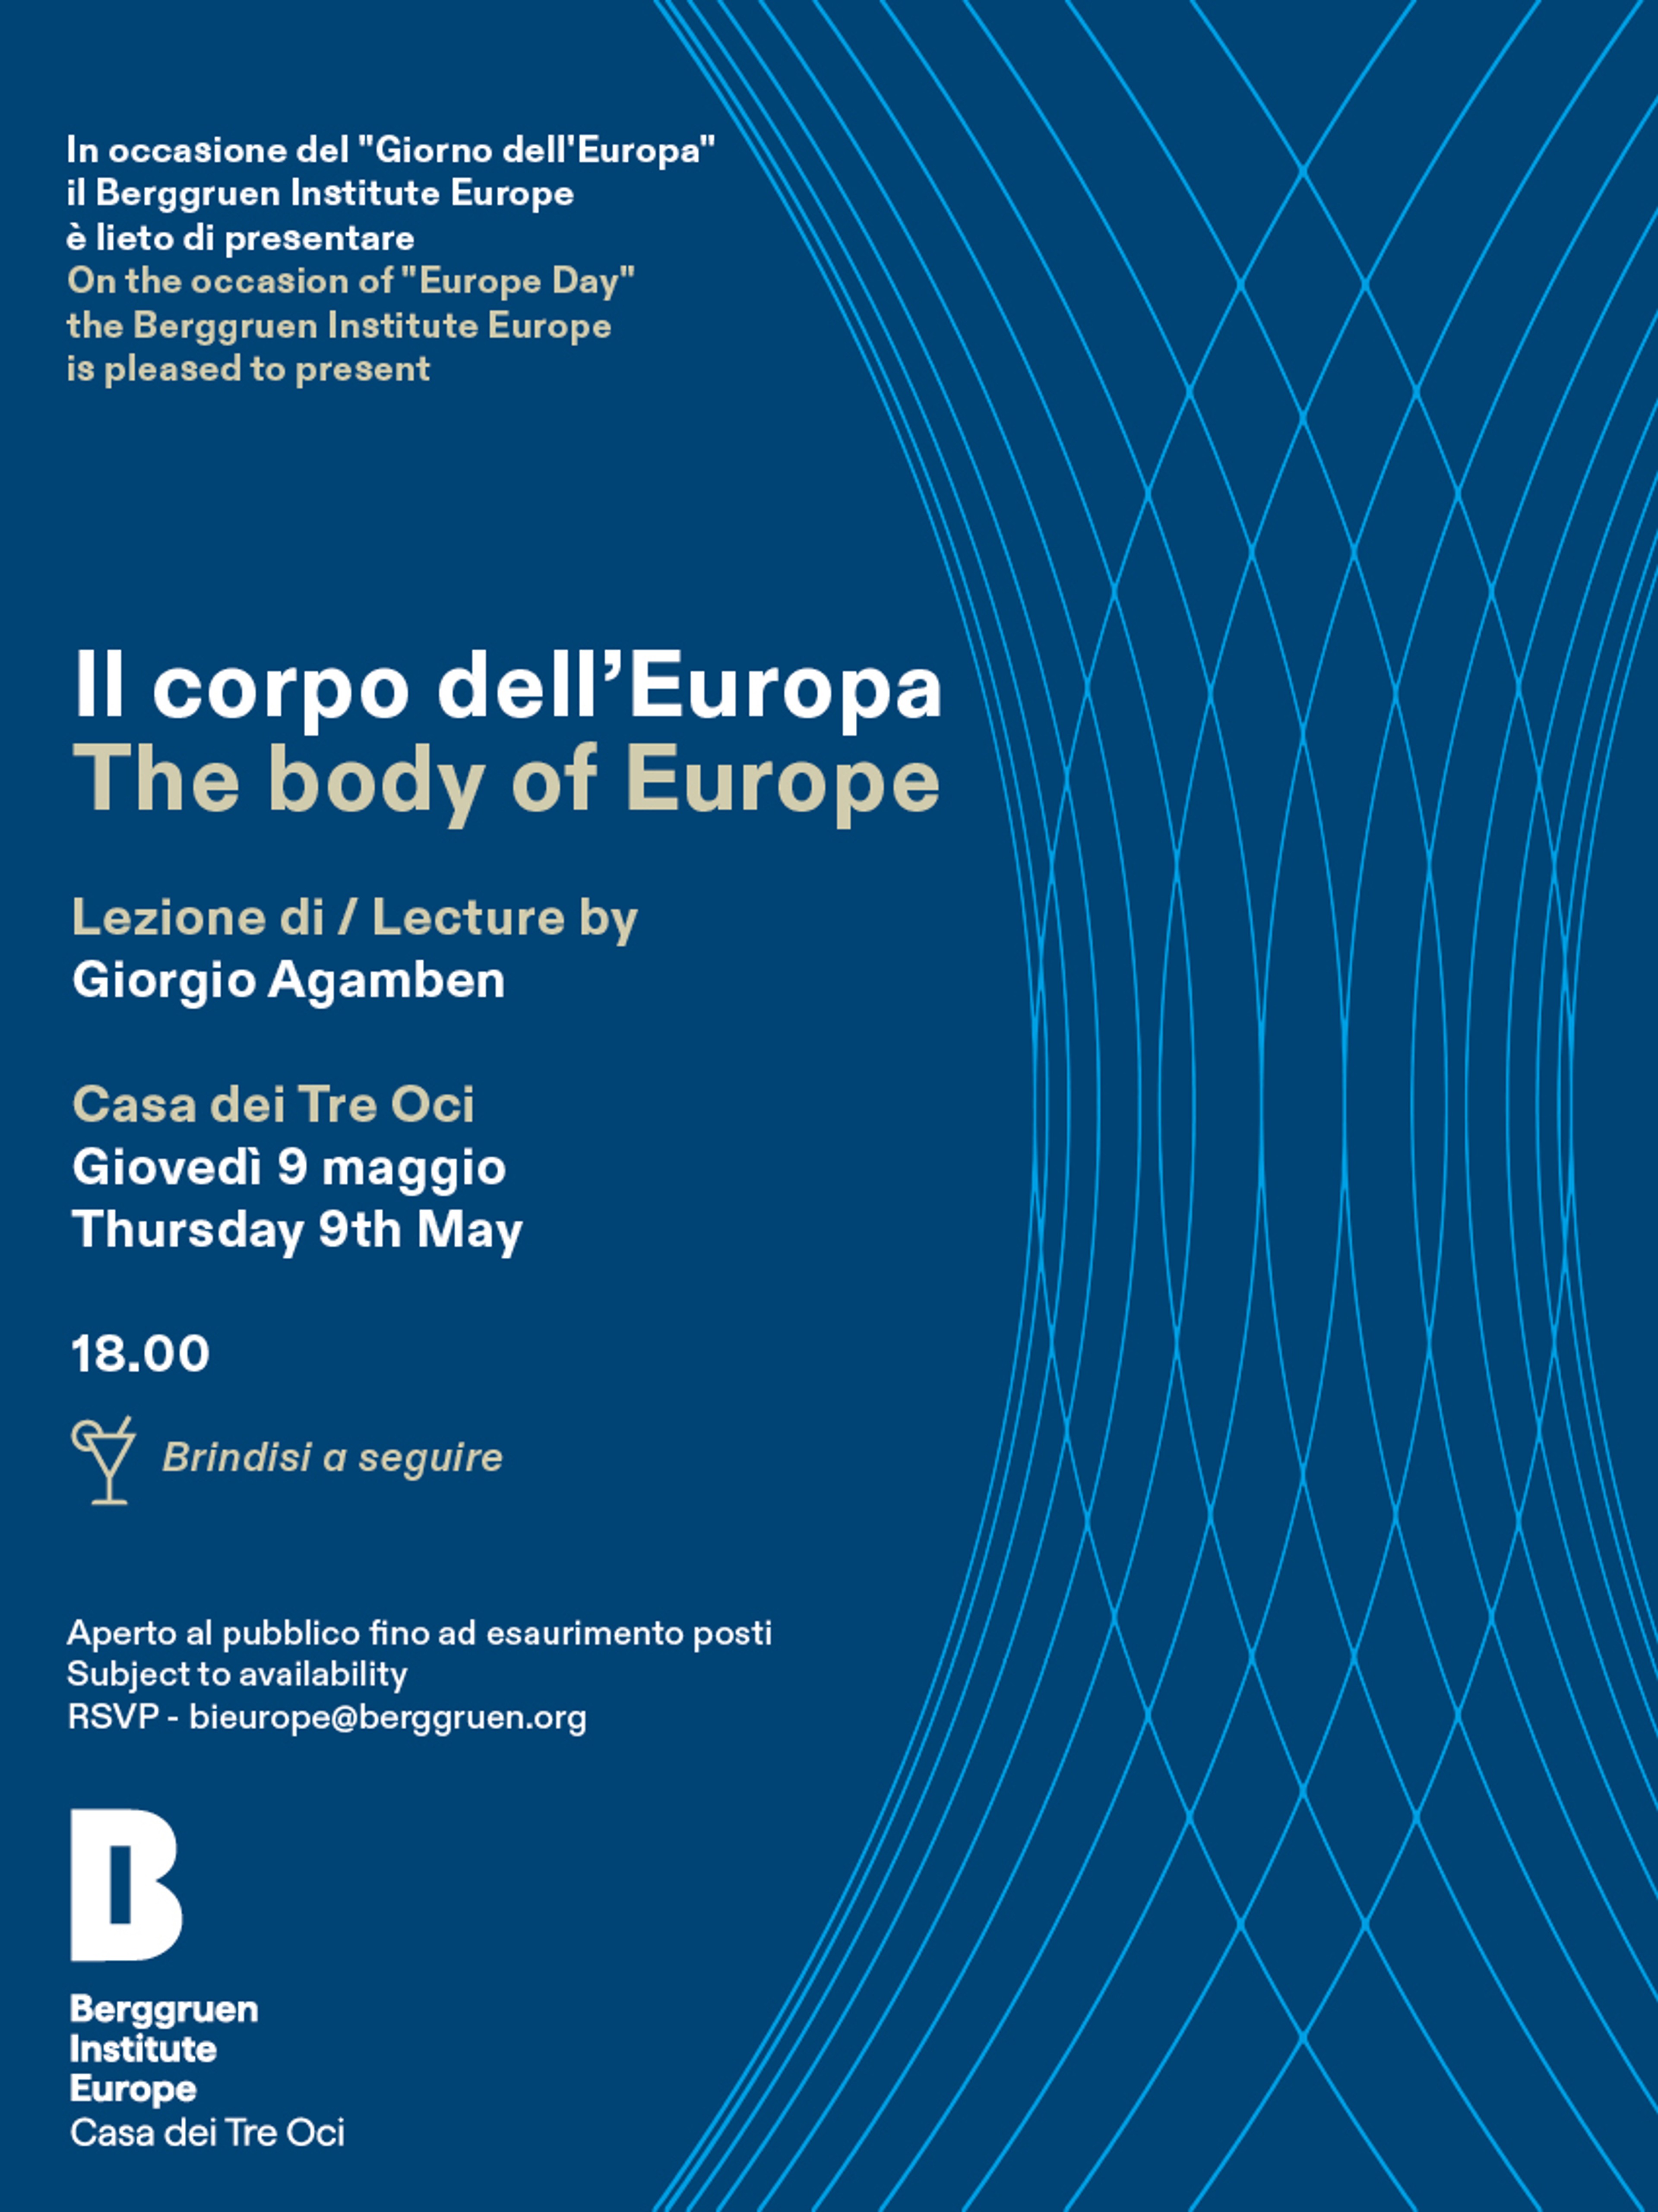 The Body of Europe title card